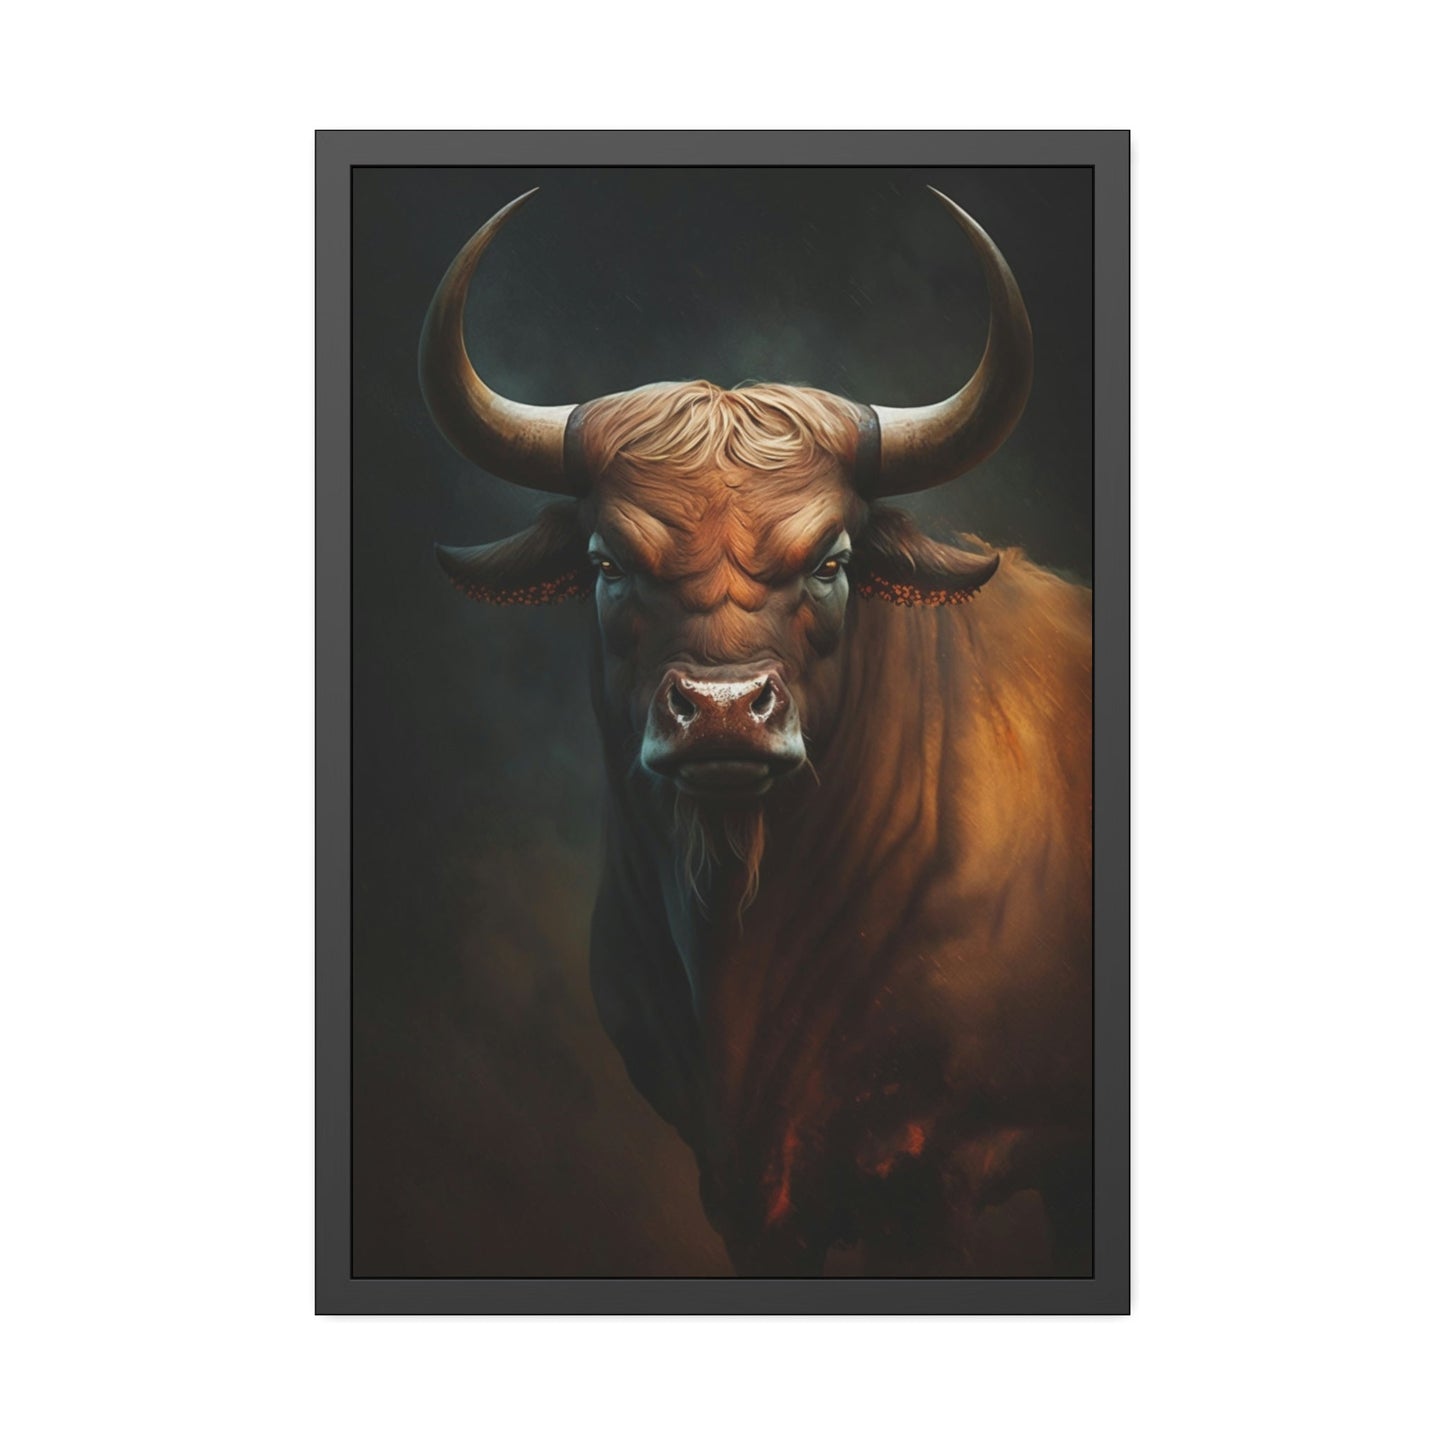 Portrait of a Bull: Natural Canvas & Poster Print of Majestic Animal